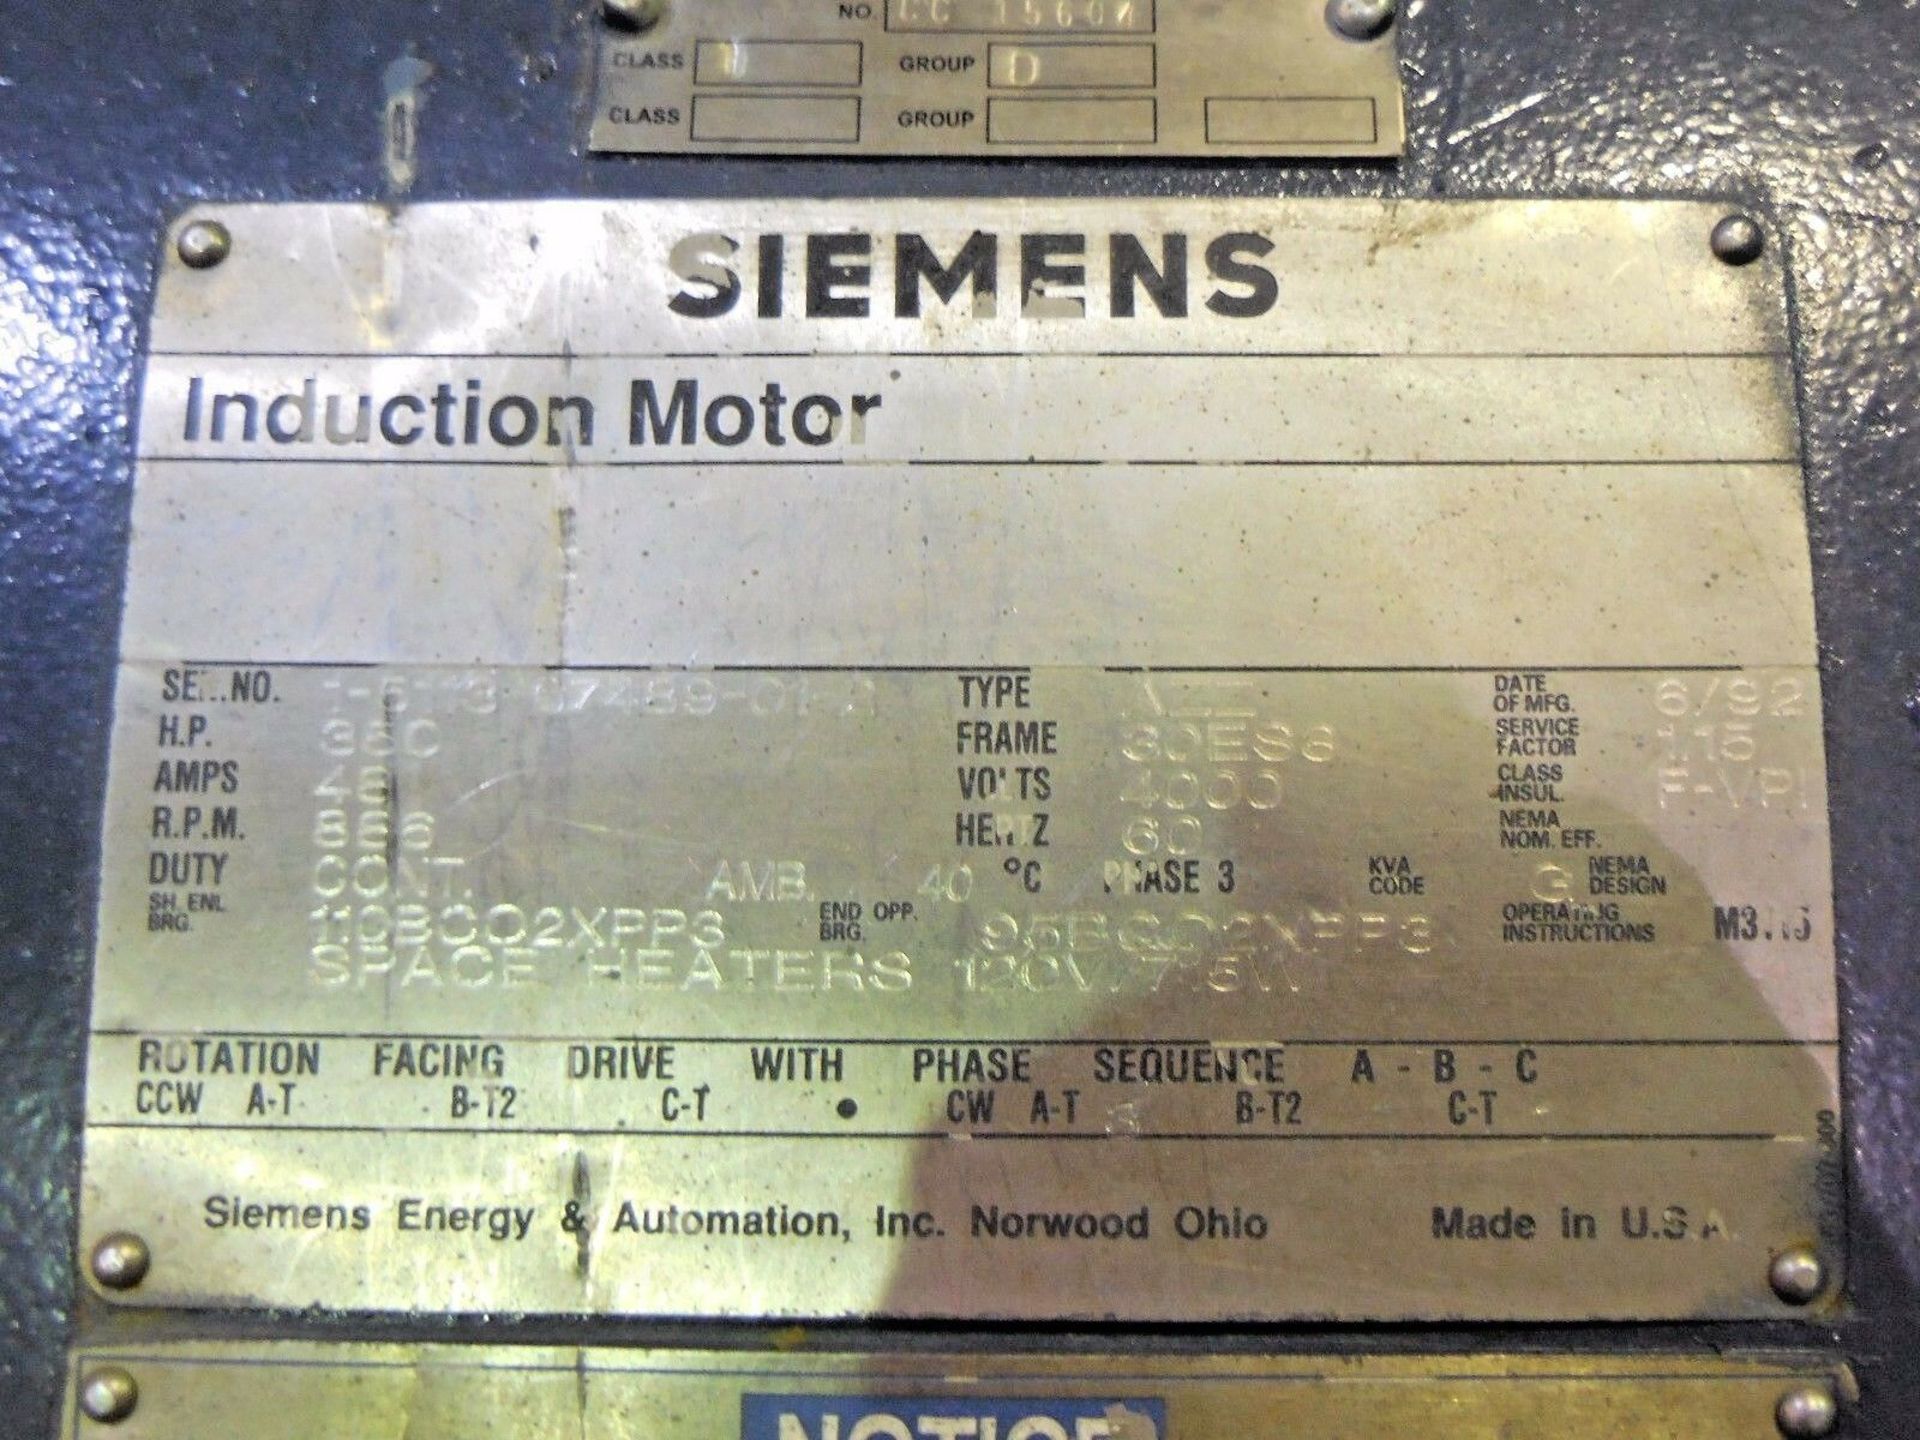 Siemens 350 HP Induction Motor. 886 RPM. 3 Ph. 4000 V. AZZ. 30ES8. 48 A. 60 Hz. - Image 4 of 5